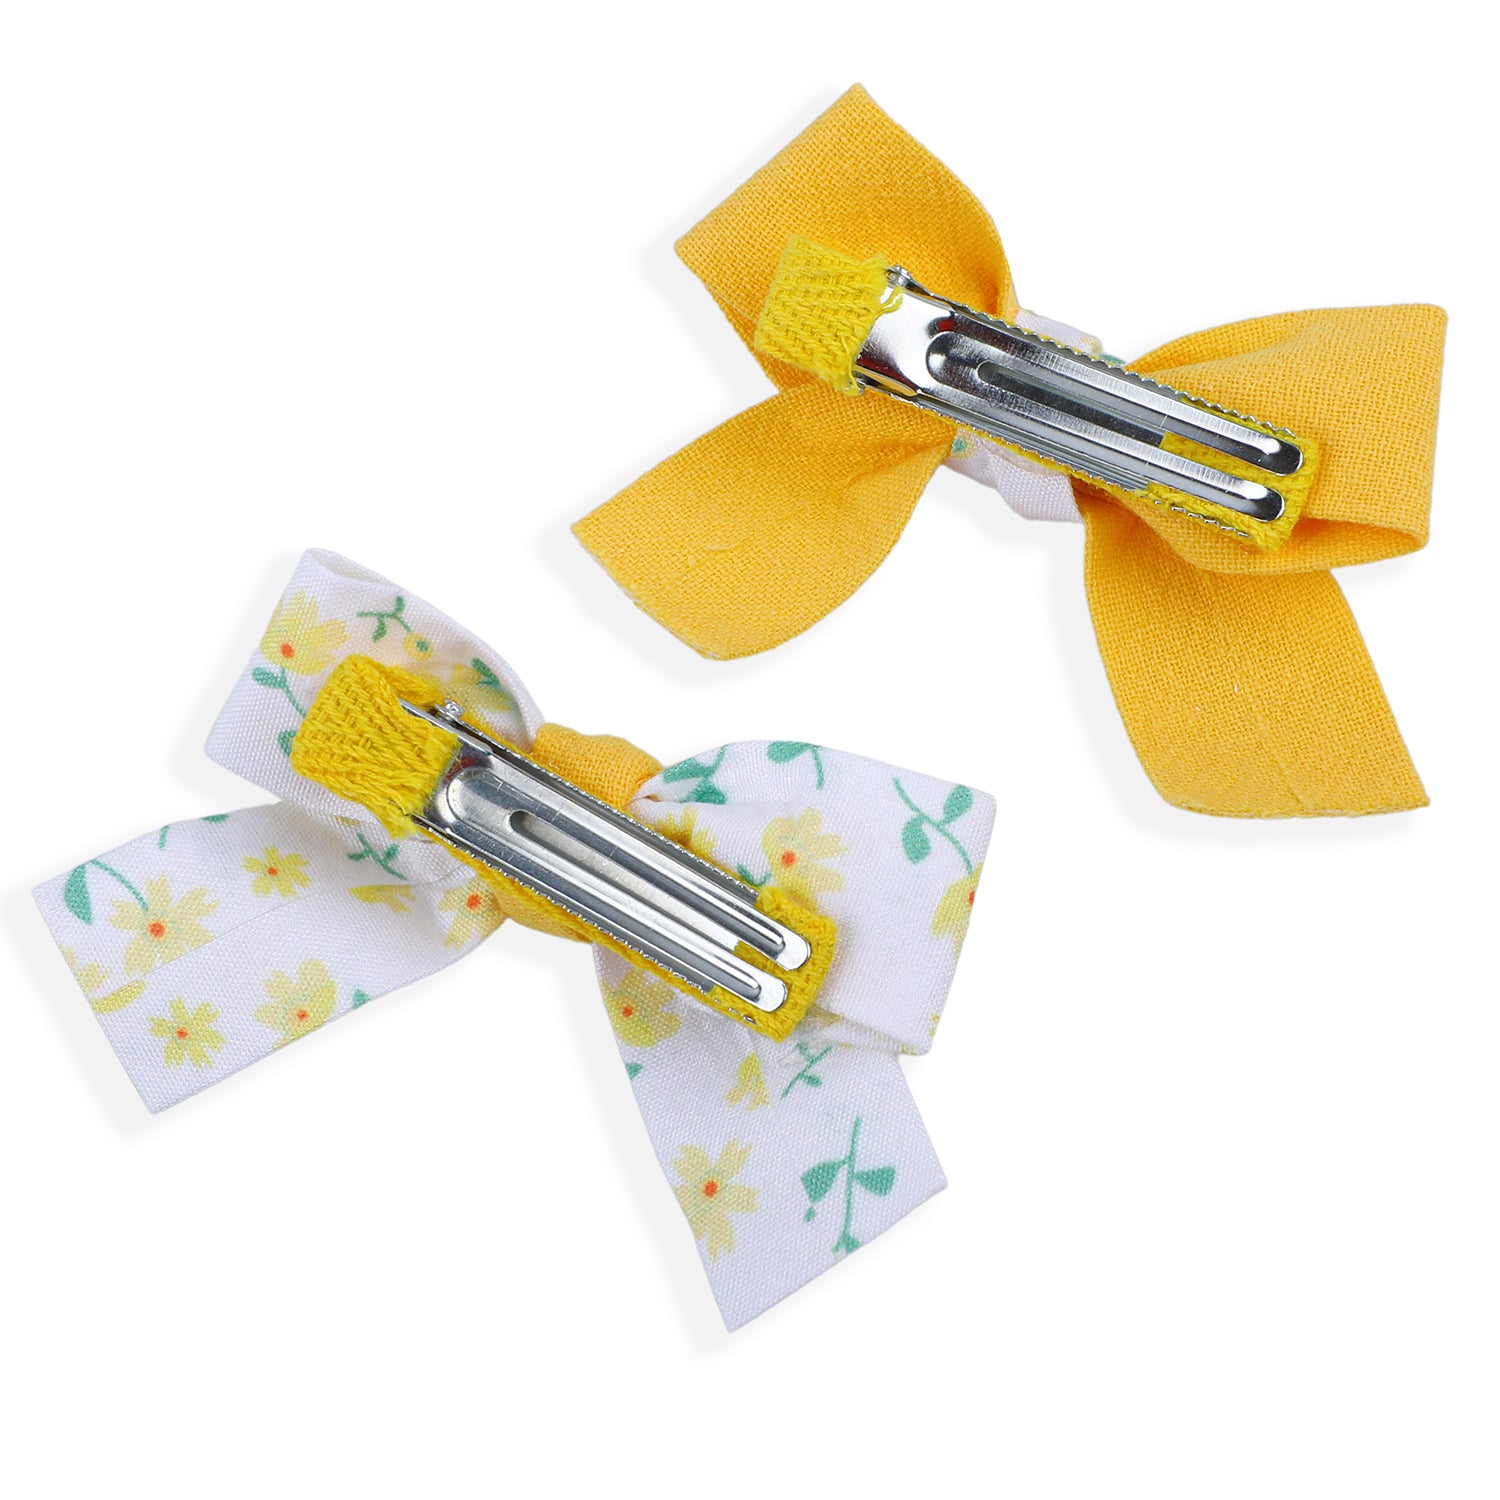 Flower Power Hair Bow Clip Set of 2 - Yellow - Baby Moo